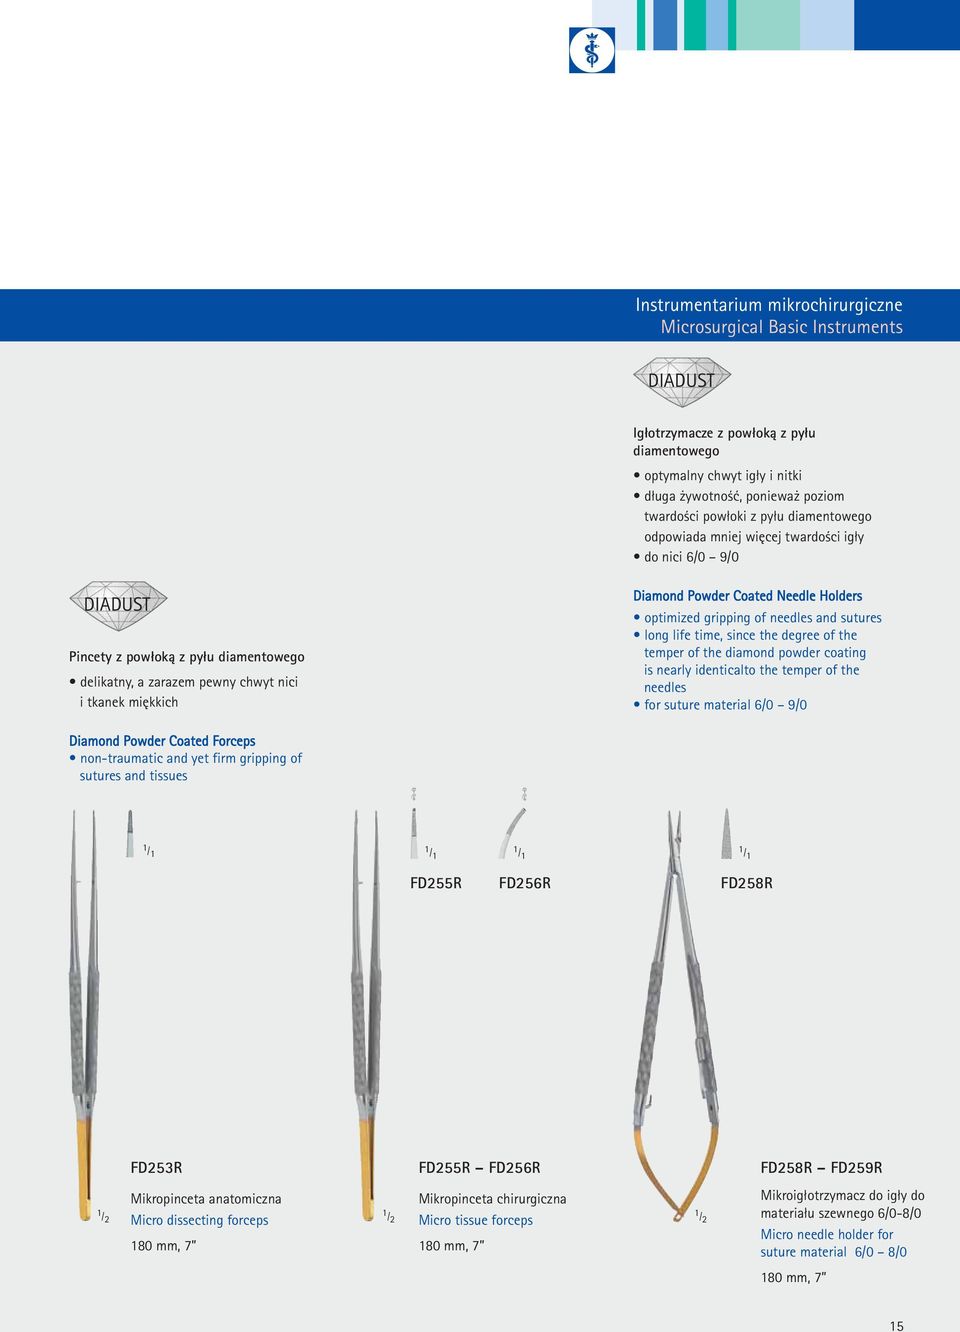 Needle Holders optimized gripping of needles and sutures long life time, since the degree of the temper of the diamond powder coating is nearly identicalto the temper of the needles for suture